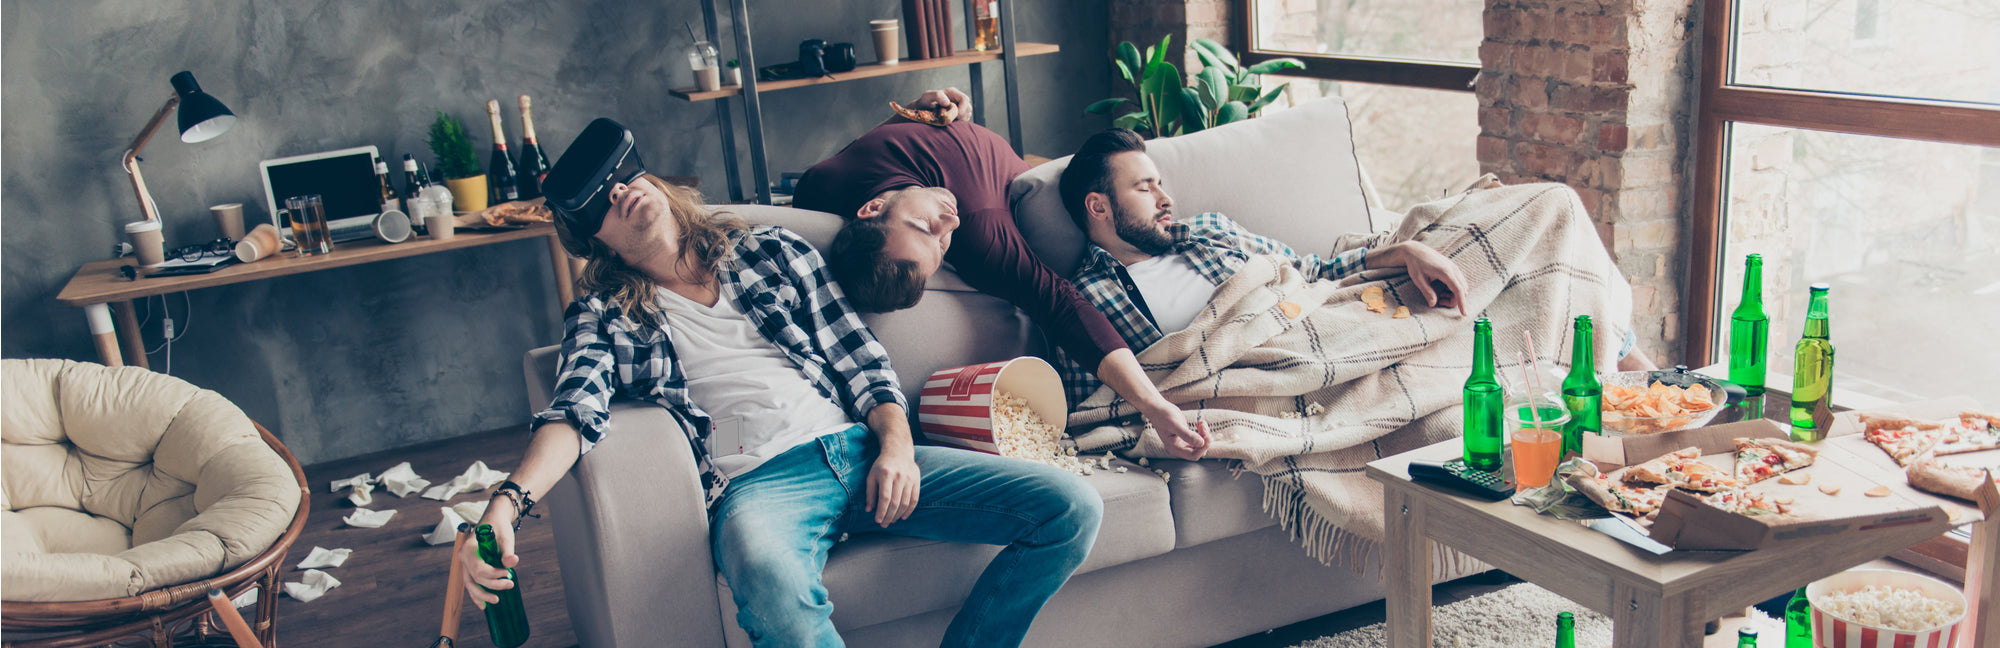 How to Deal With a Cannabis Hangover